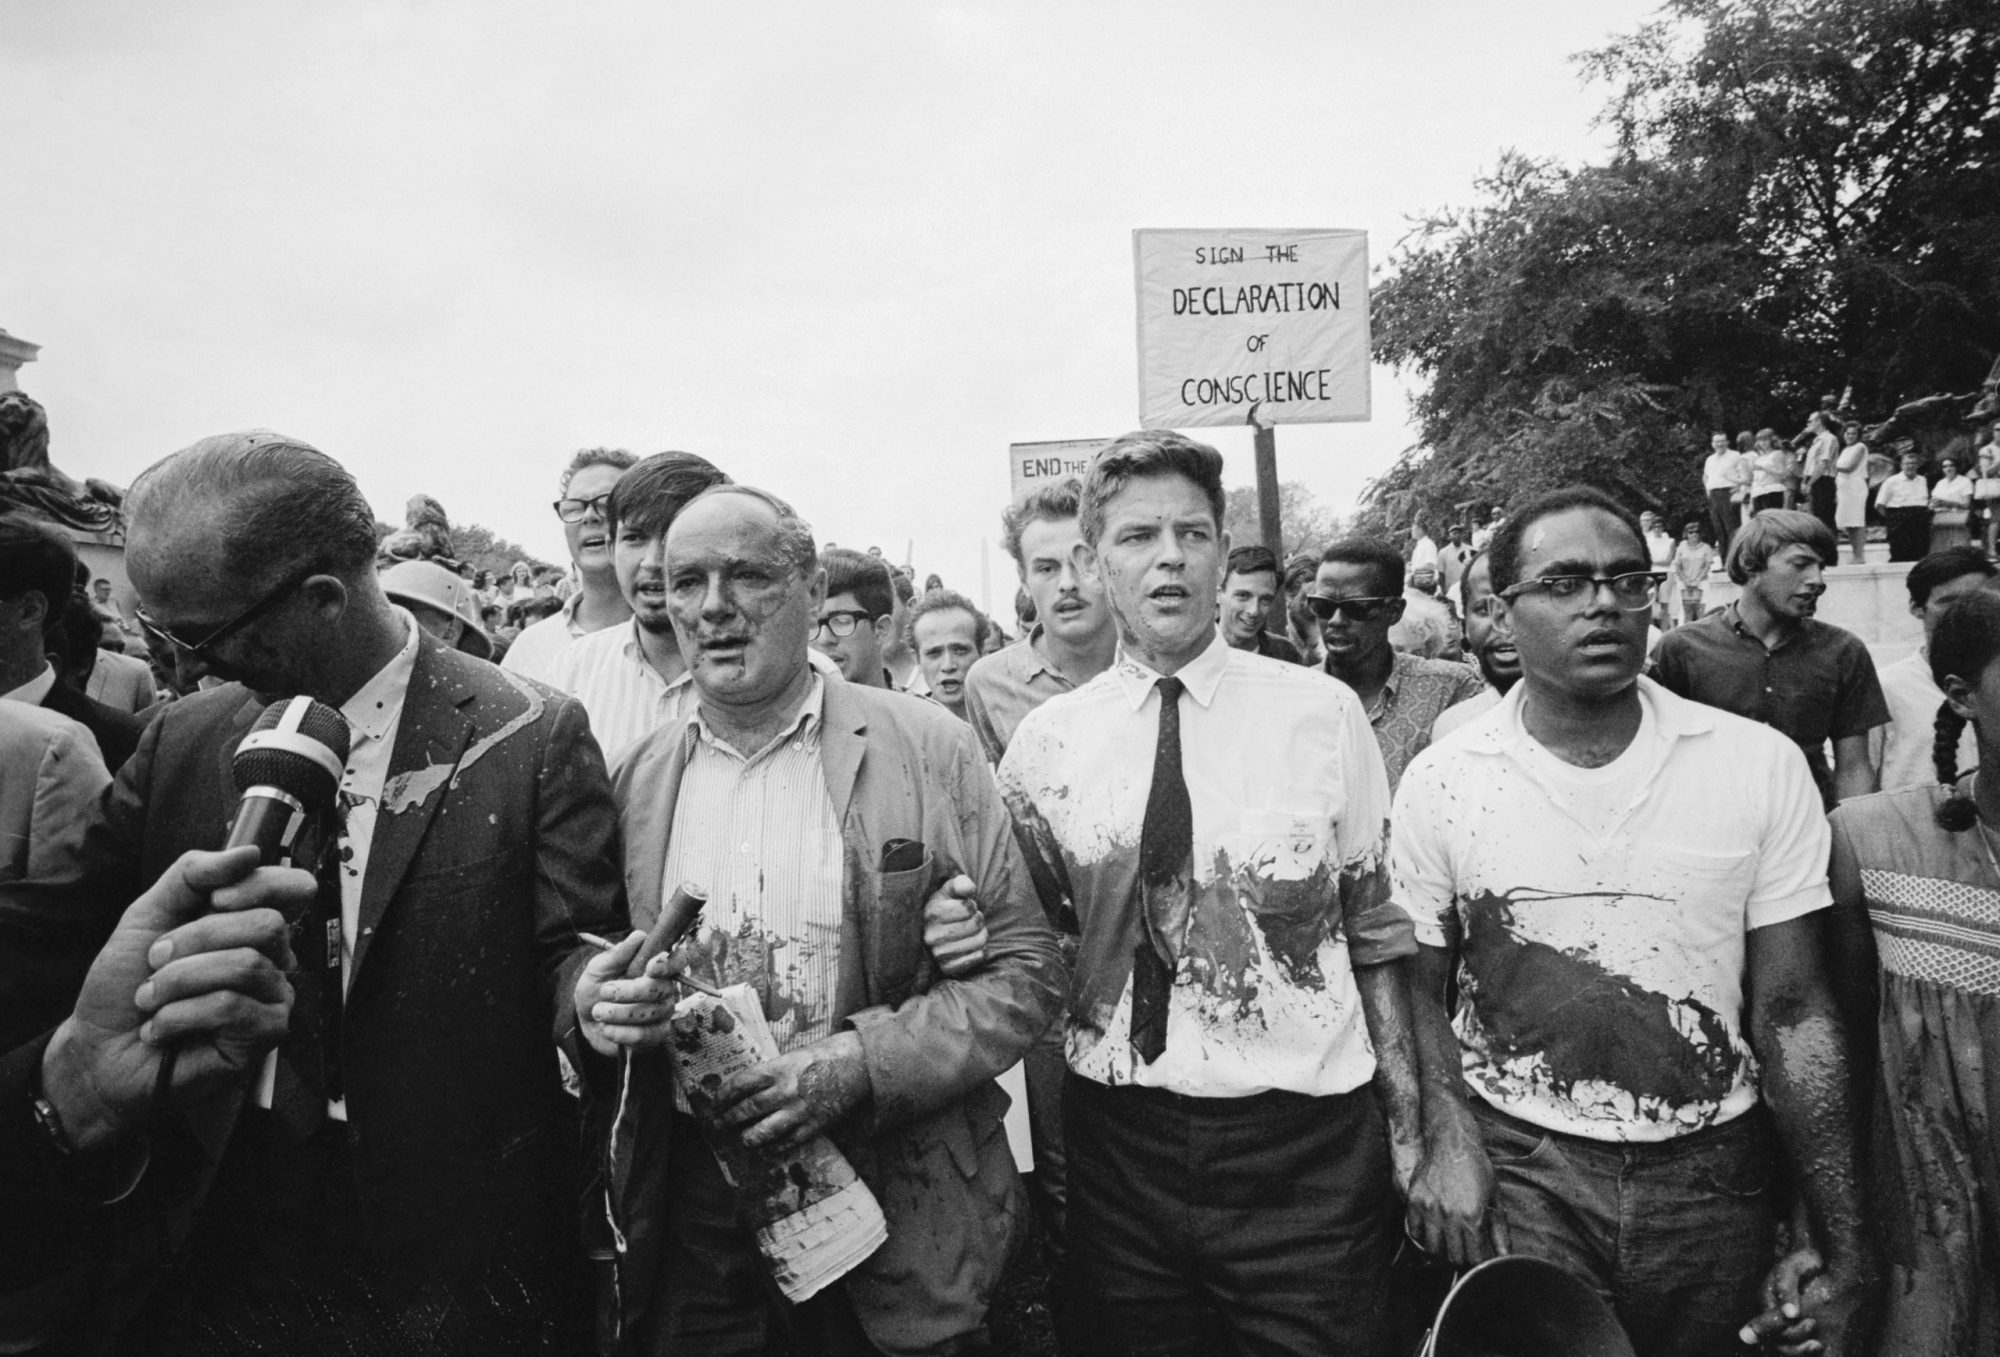 Professor Staughton Lynd. an outspoken critic of U.S. policy in Vietnam, was reported to be in Hanoi 12/28 to gather information regarding North Vietnam's peace conditions. LYnd, shown here in a 1965 file photo after he was splashed with red paint on a peace March in Washington, teaches history at Yale university and is one of the leaders of the Anti-war movement.